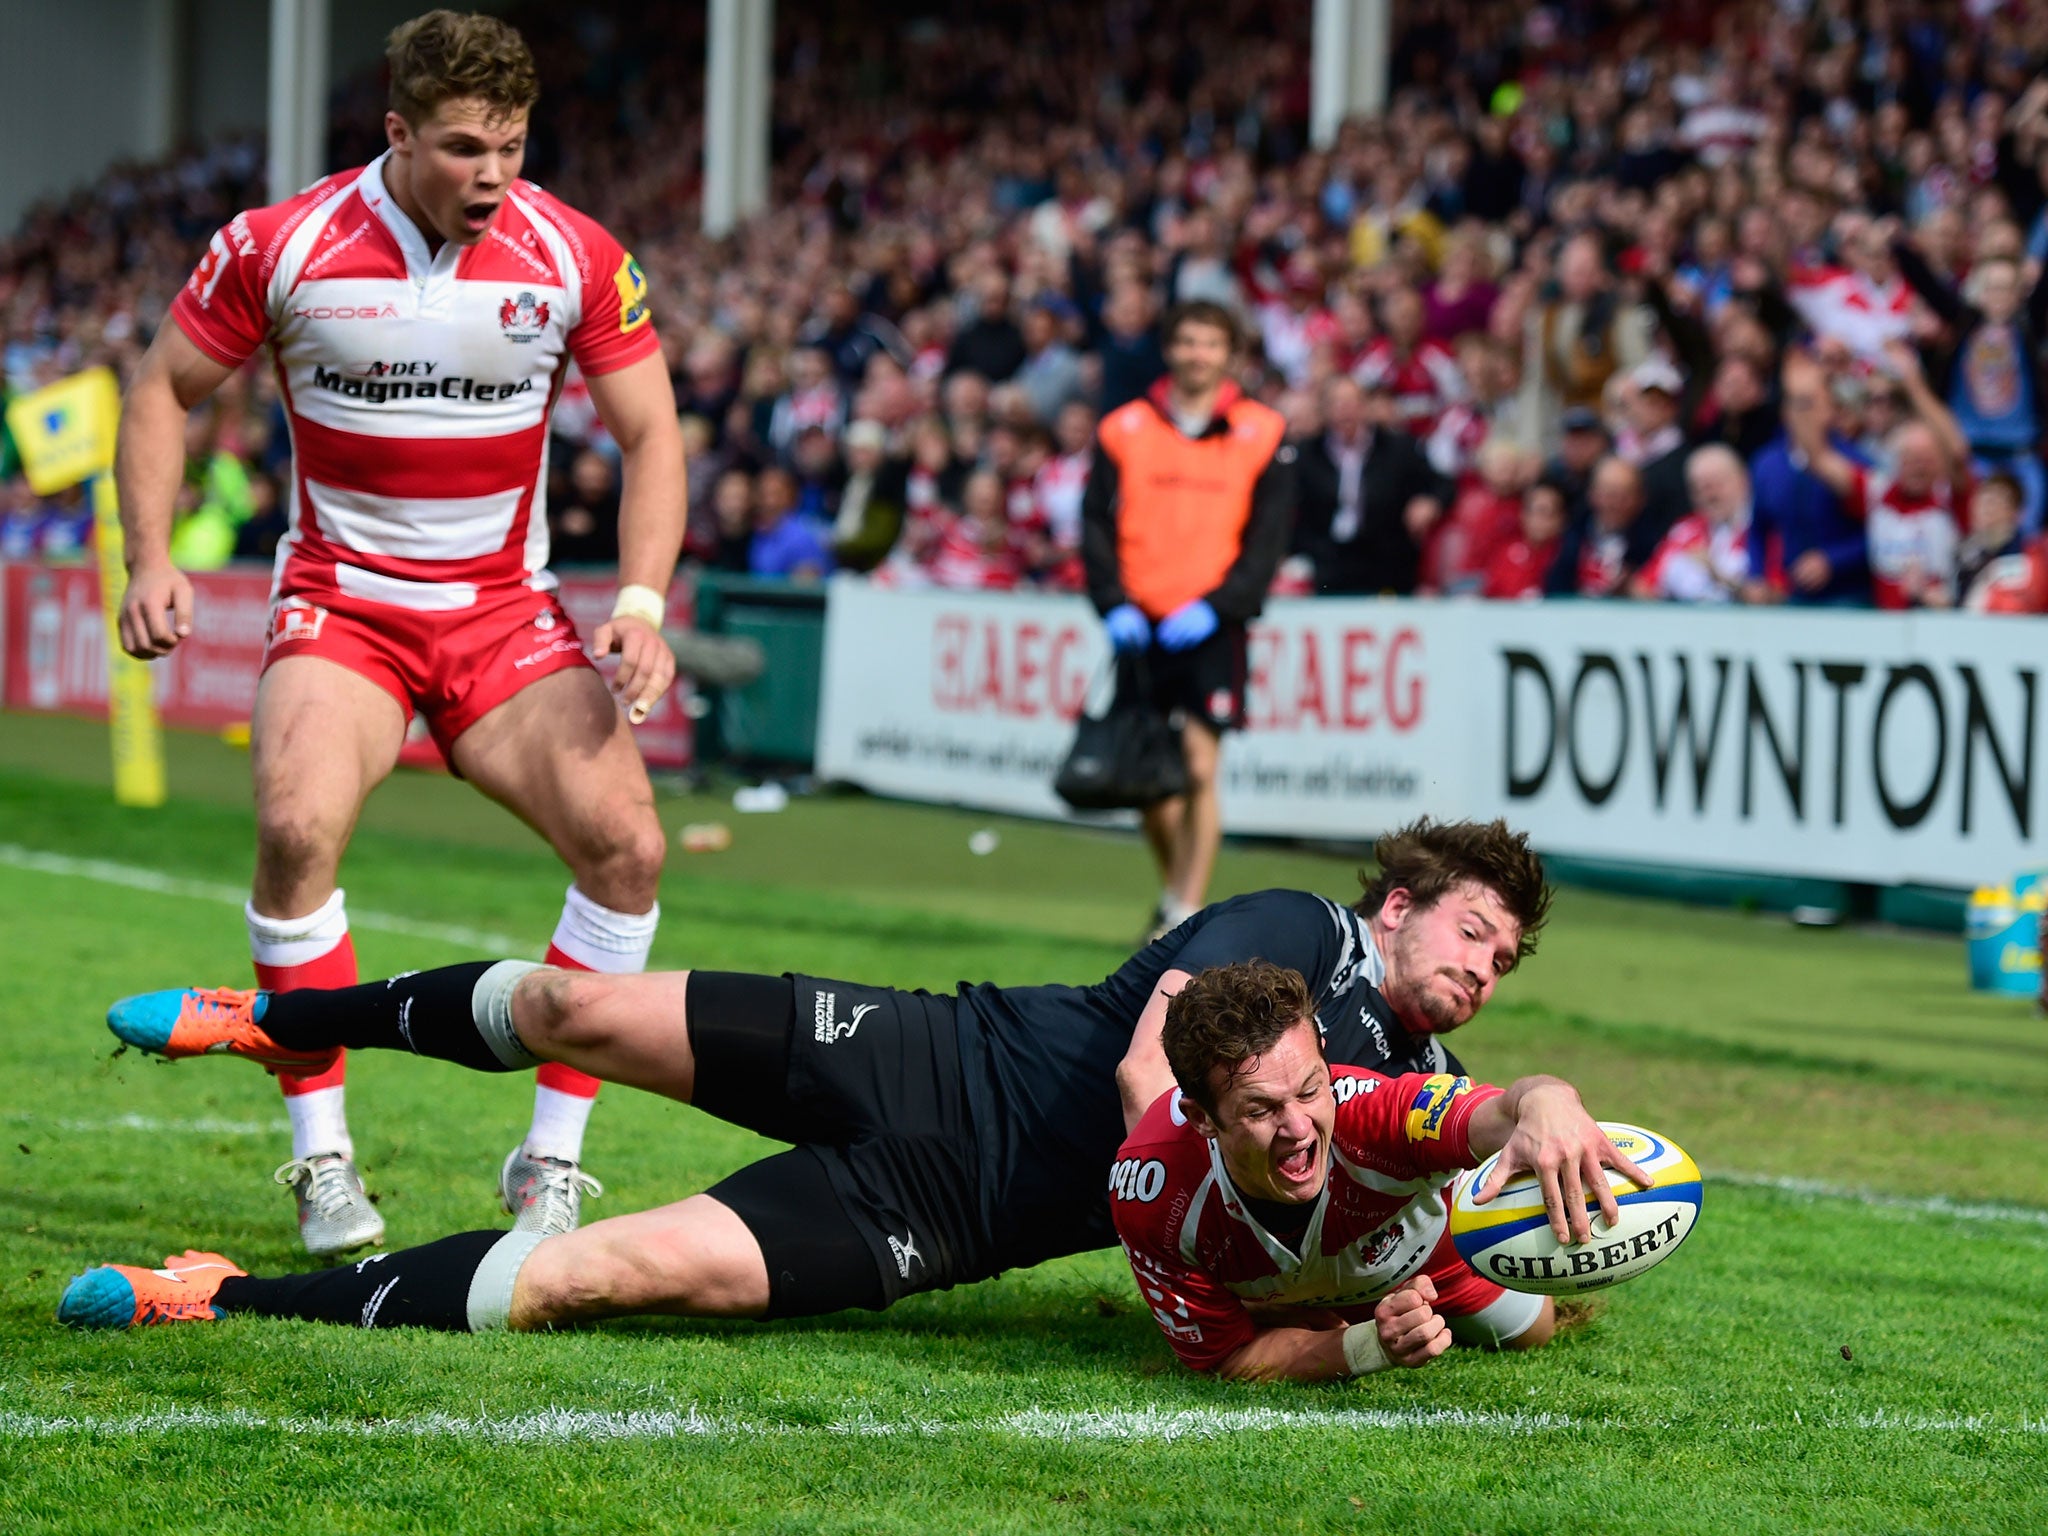 Billy Burns touches down the deciding try to win the game for Gloucester